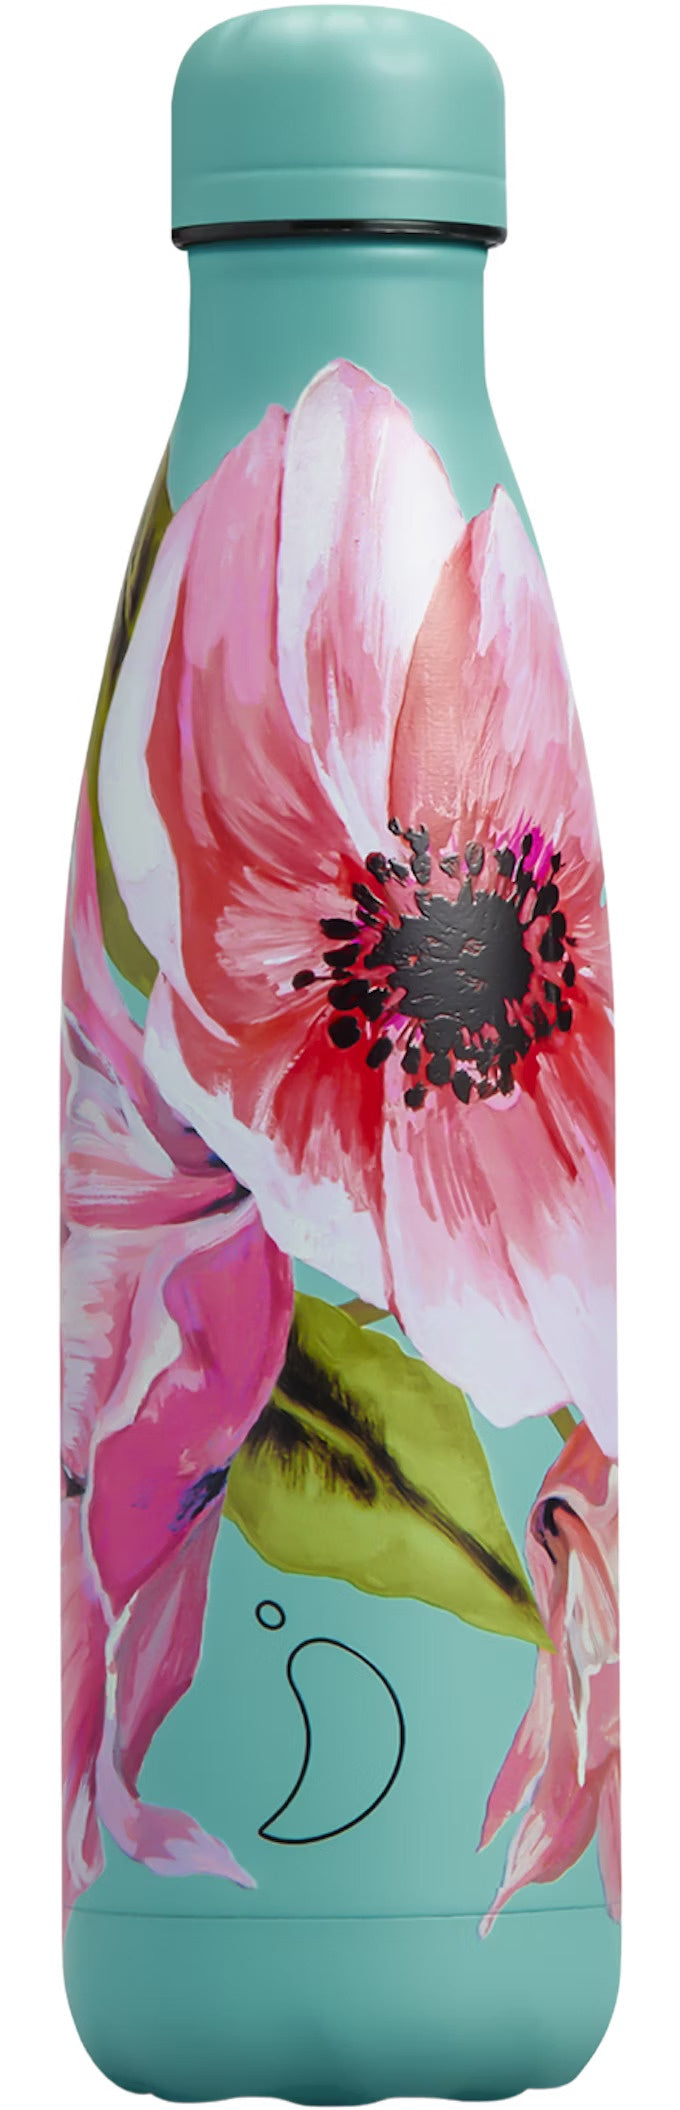 Chilly's Water Bottle - Anemone Floral